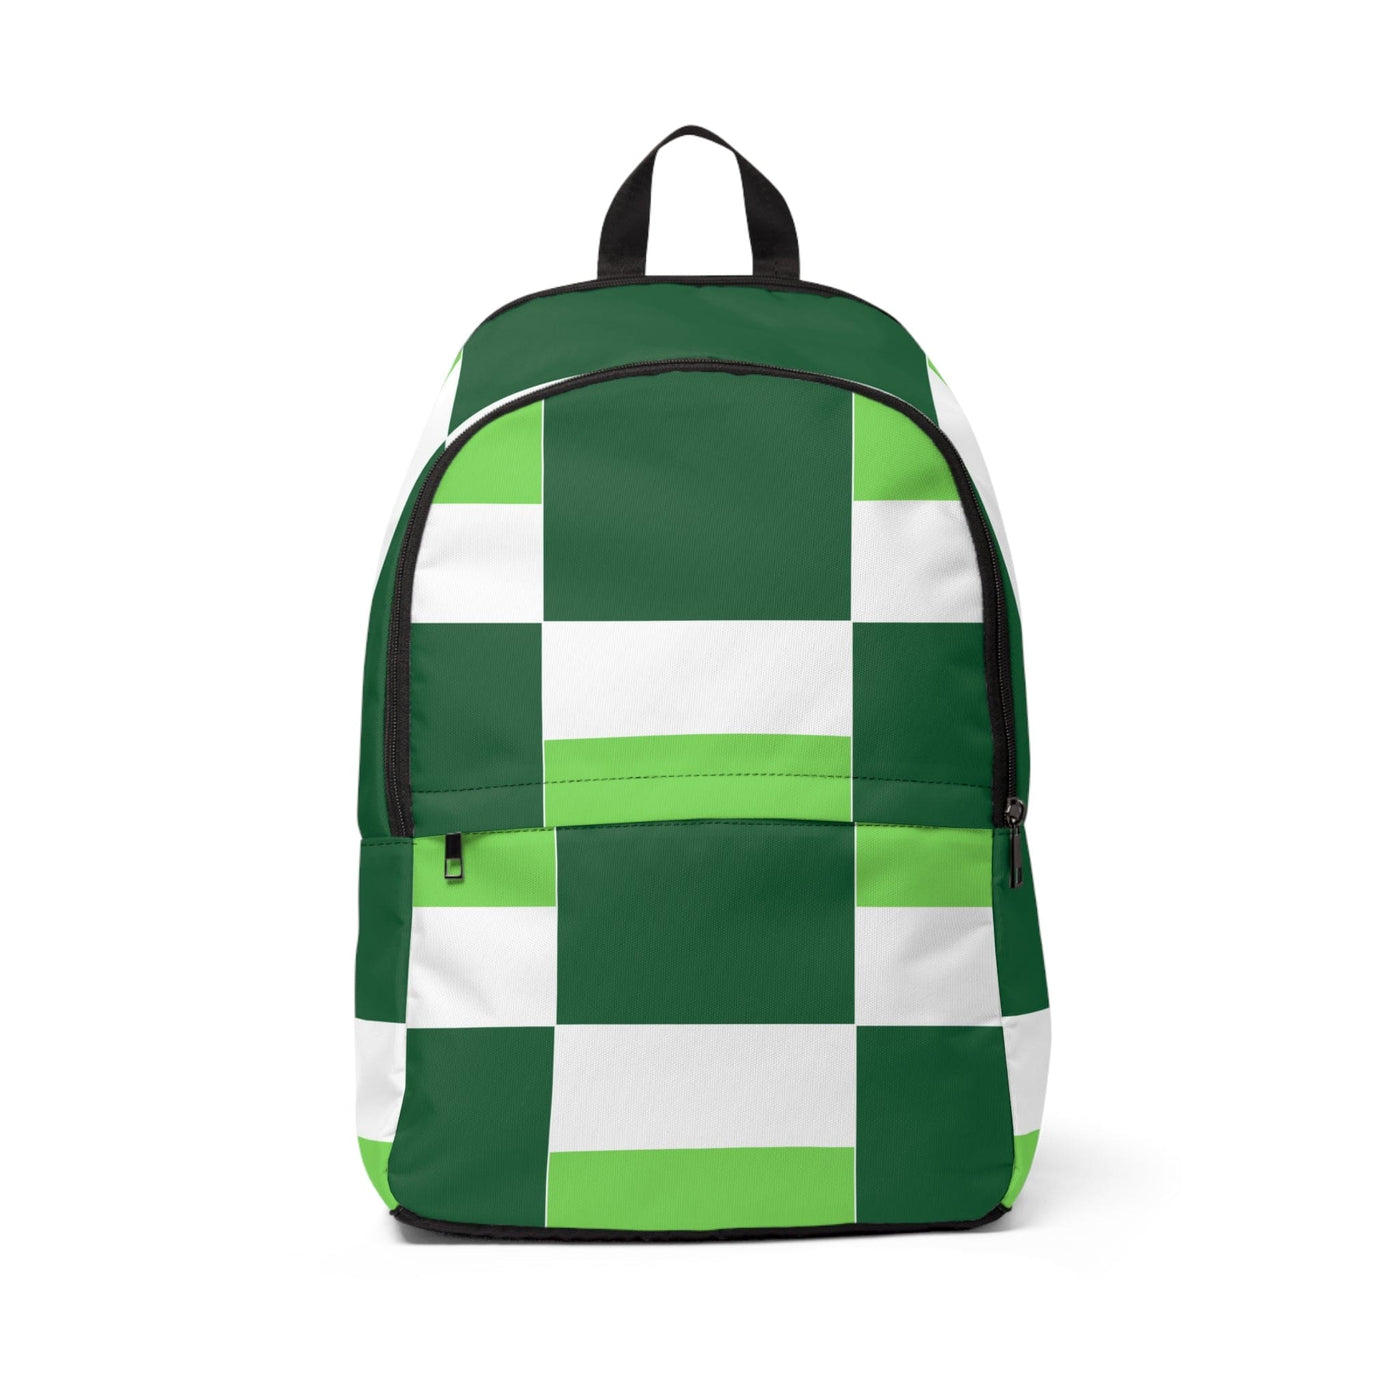 Fashion Backpack Waterproof Lime Forest Irish Green Colorblock - Bags